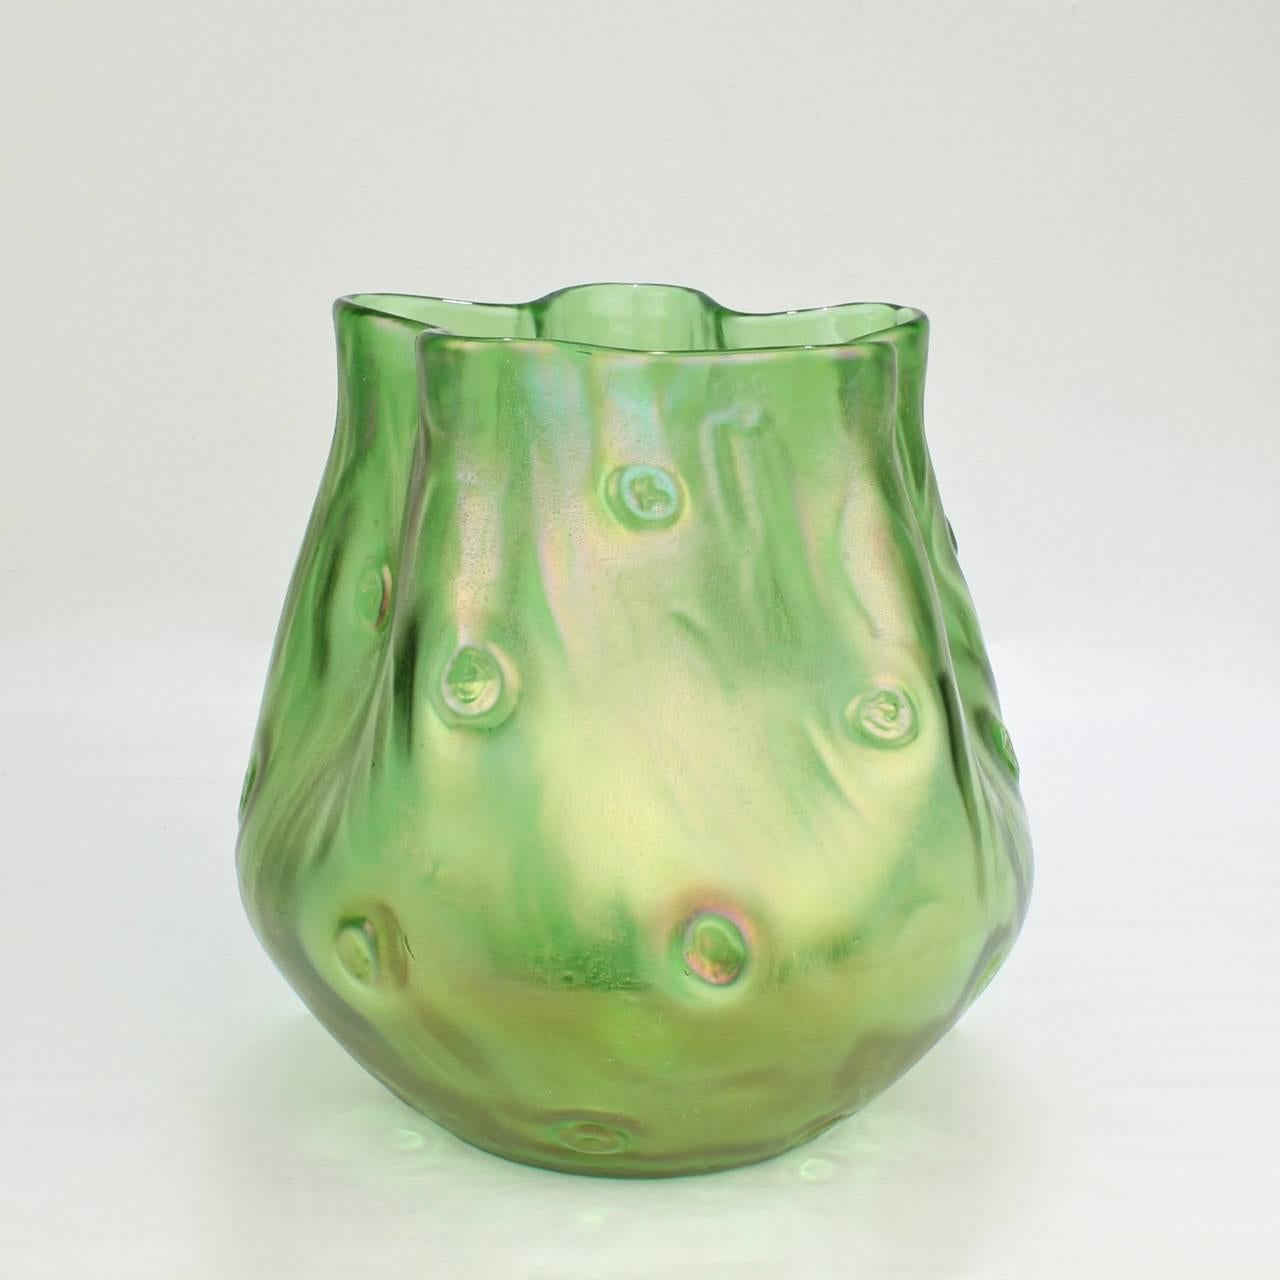 A well-scaled Loetz Crete Rusticana pattern art glass vase with a green iridescent finish.

Its Art Nouveau or Jugenstil form mimics an organic knotty wooden surface with a cinquefoil pinched lip and a polished pontil base. 

Measures: Height: